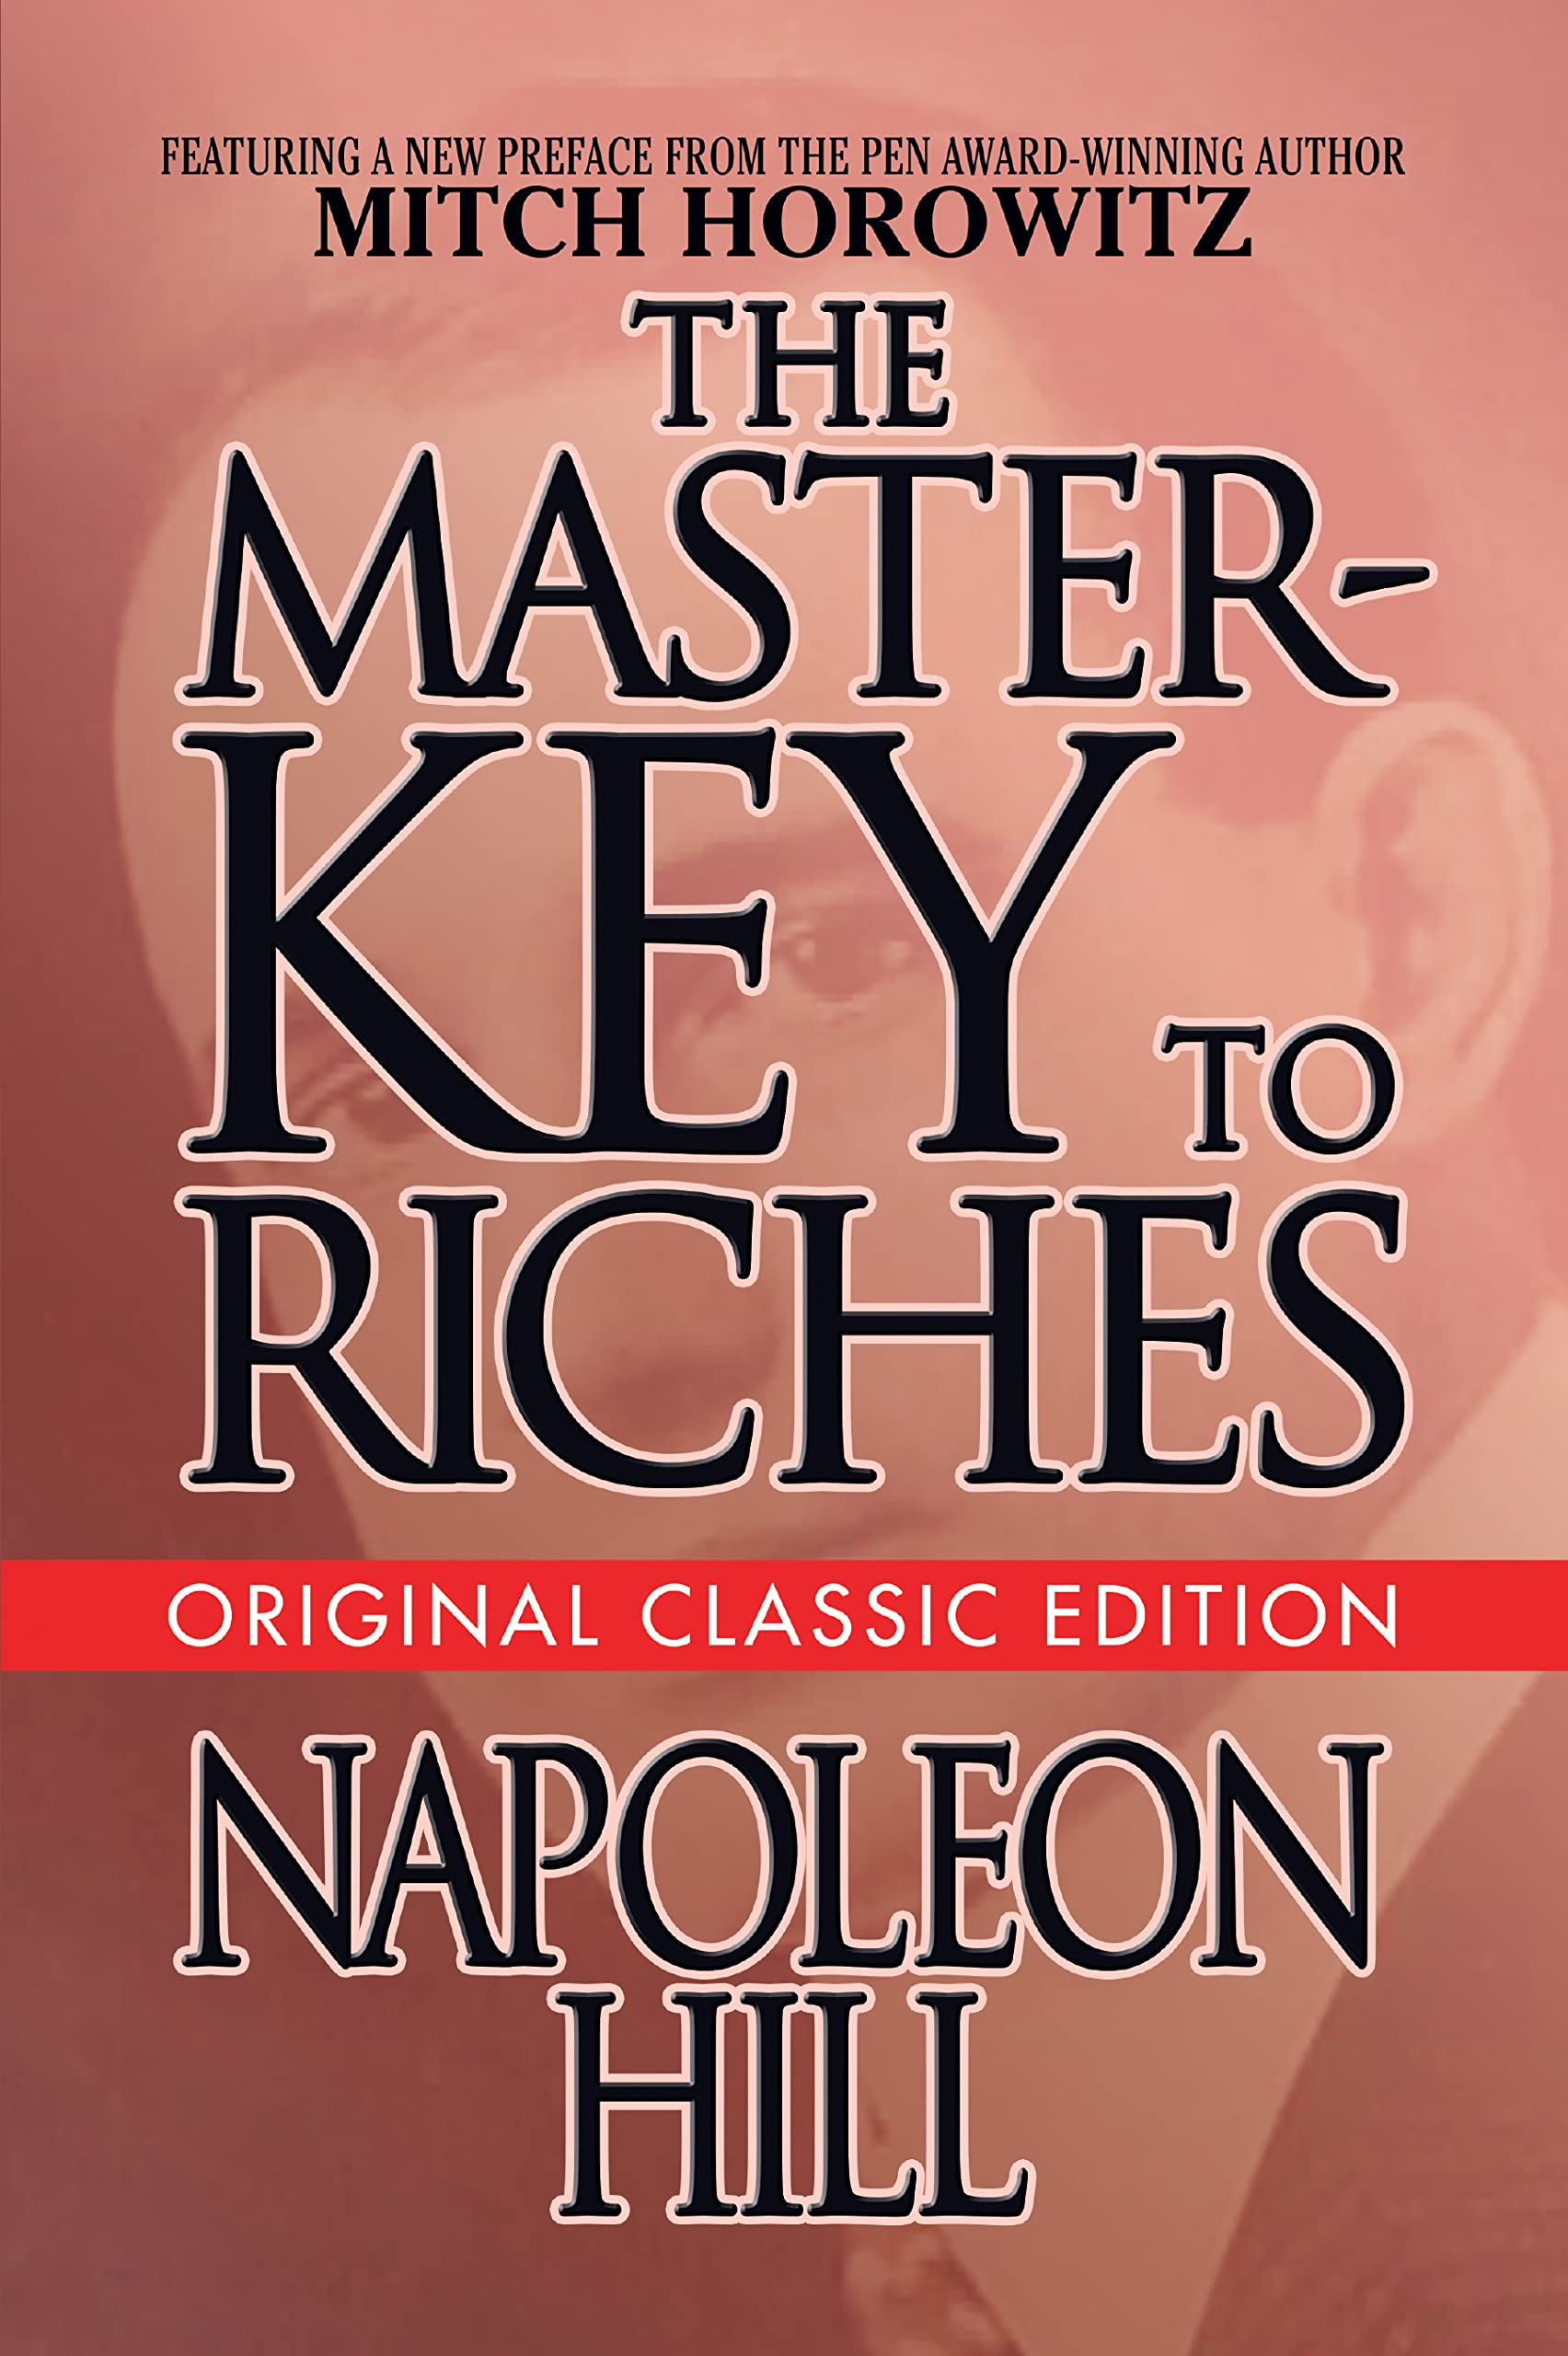 The Master-Key to Riches SureShot Books